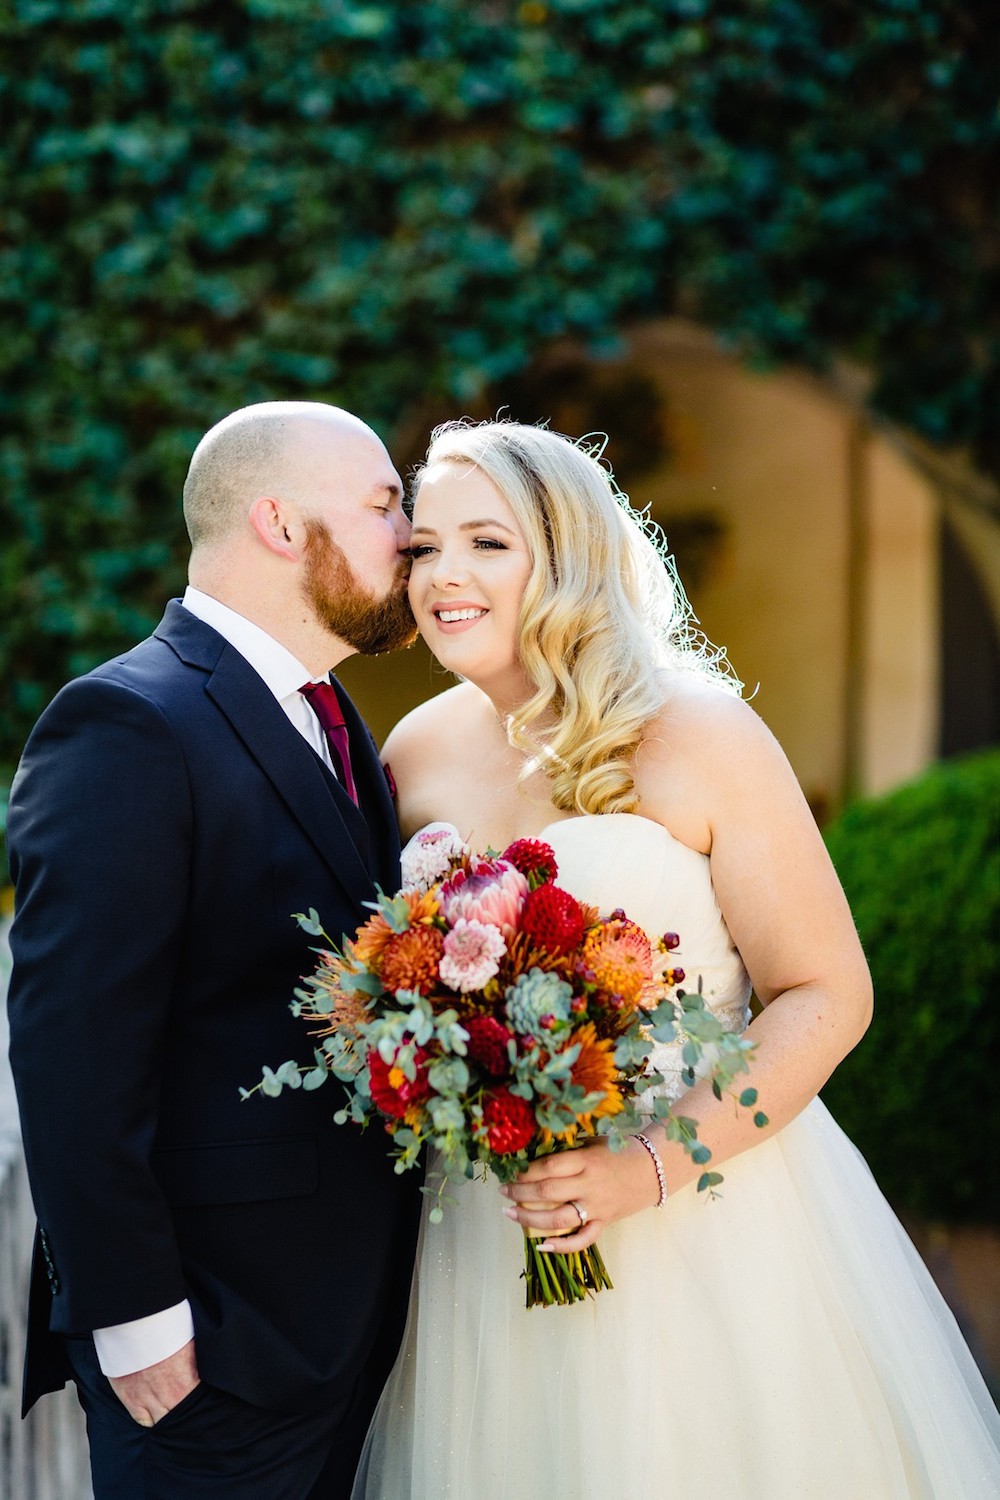 Bride being kissed on the cheek by her groom holding a colorful bouquet of flowers